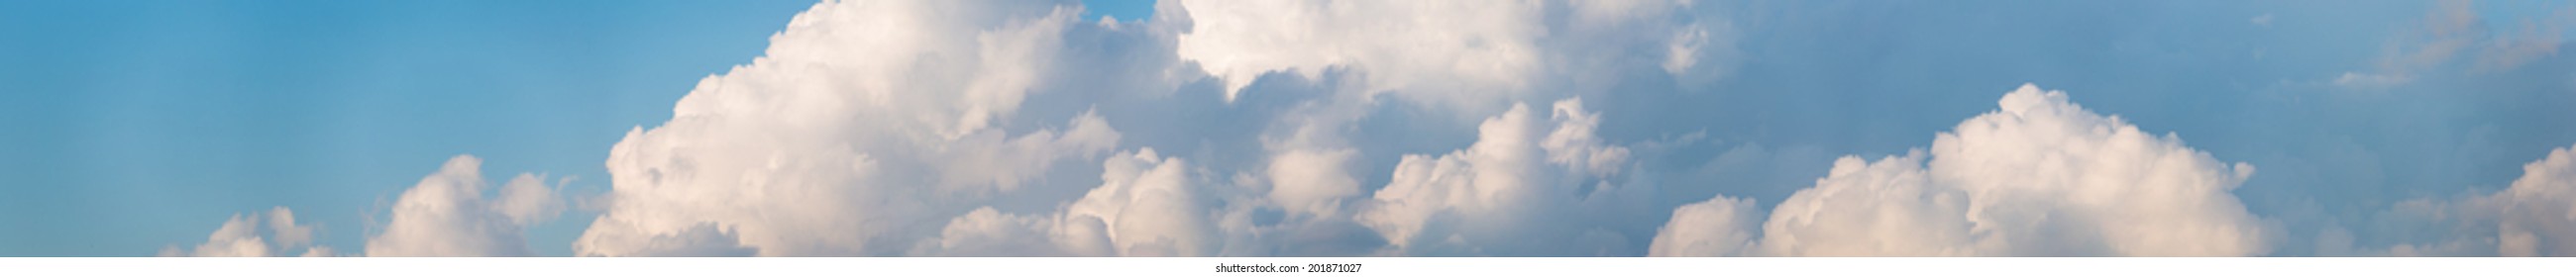 Cloudscape horizontal banner or panorama of beautiful fluffy white cumulus clouds in a sunny blue summer sky - Shutterstock ID 201871027